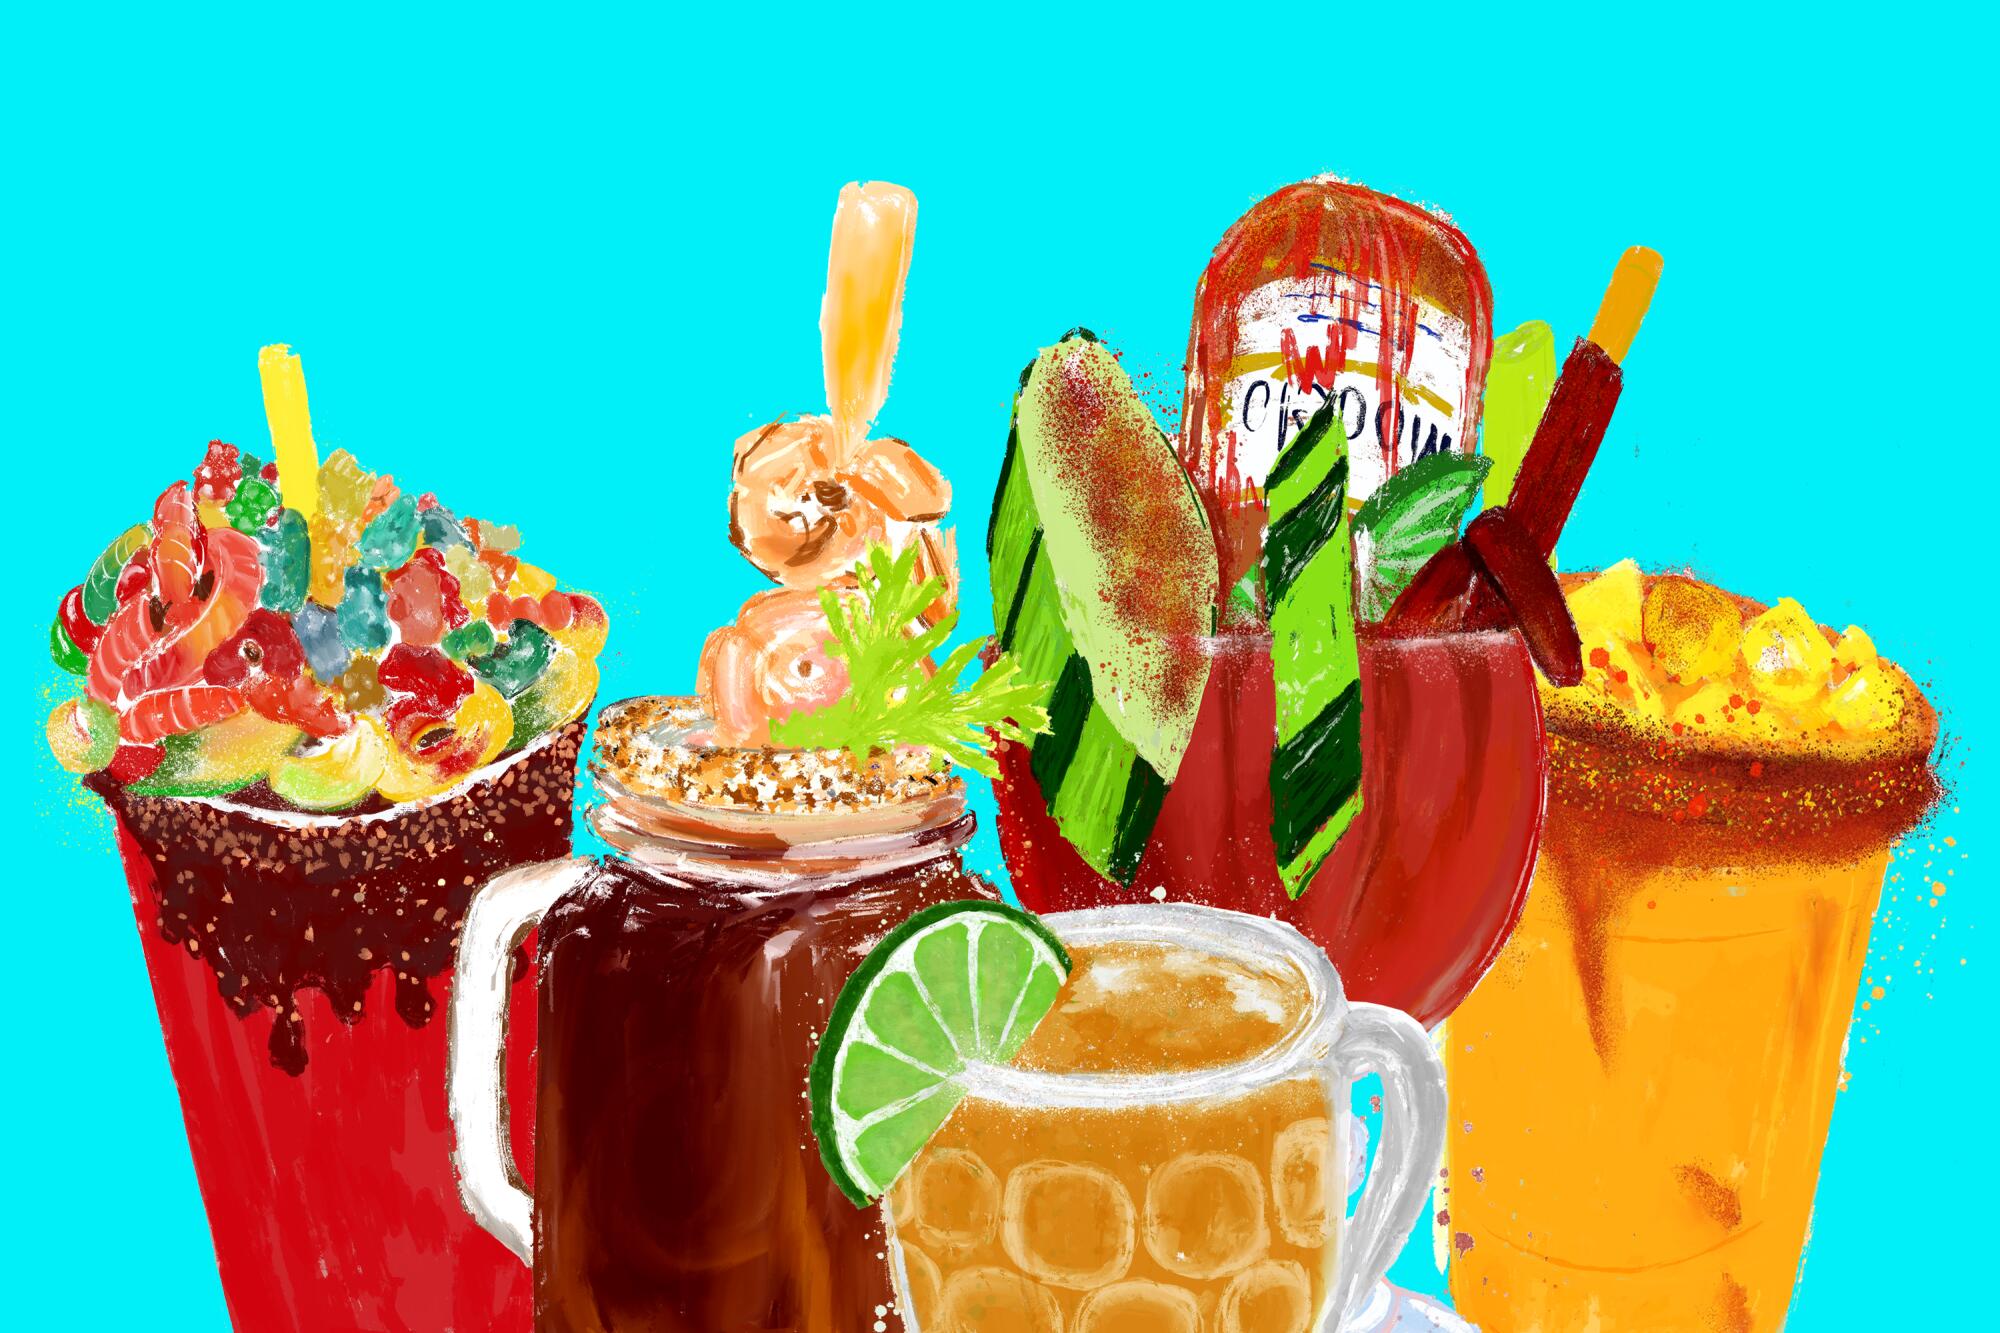 The five basic types of micheladas, from left: gomichela, botana, chelada, michelada and michelagua